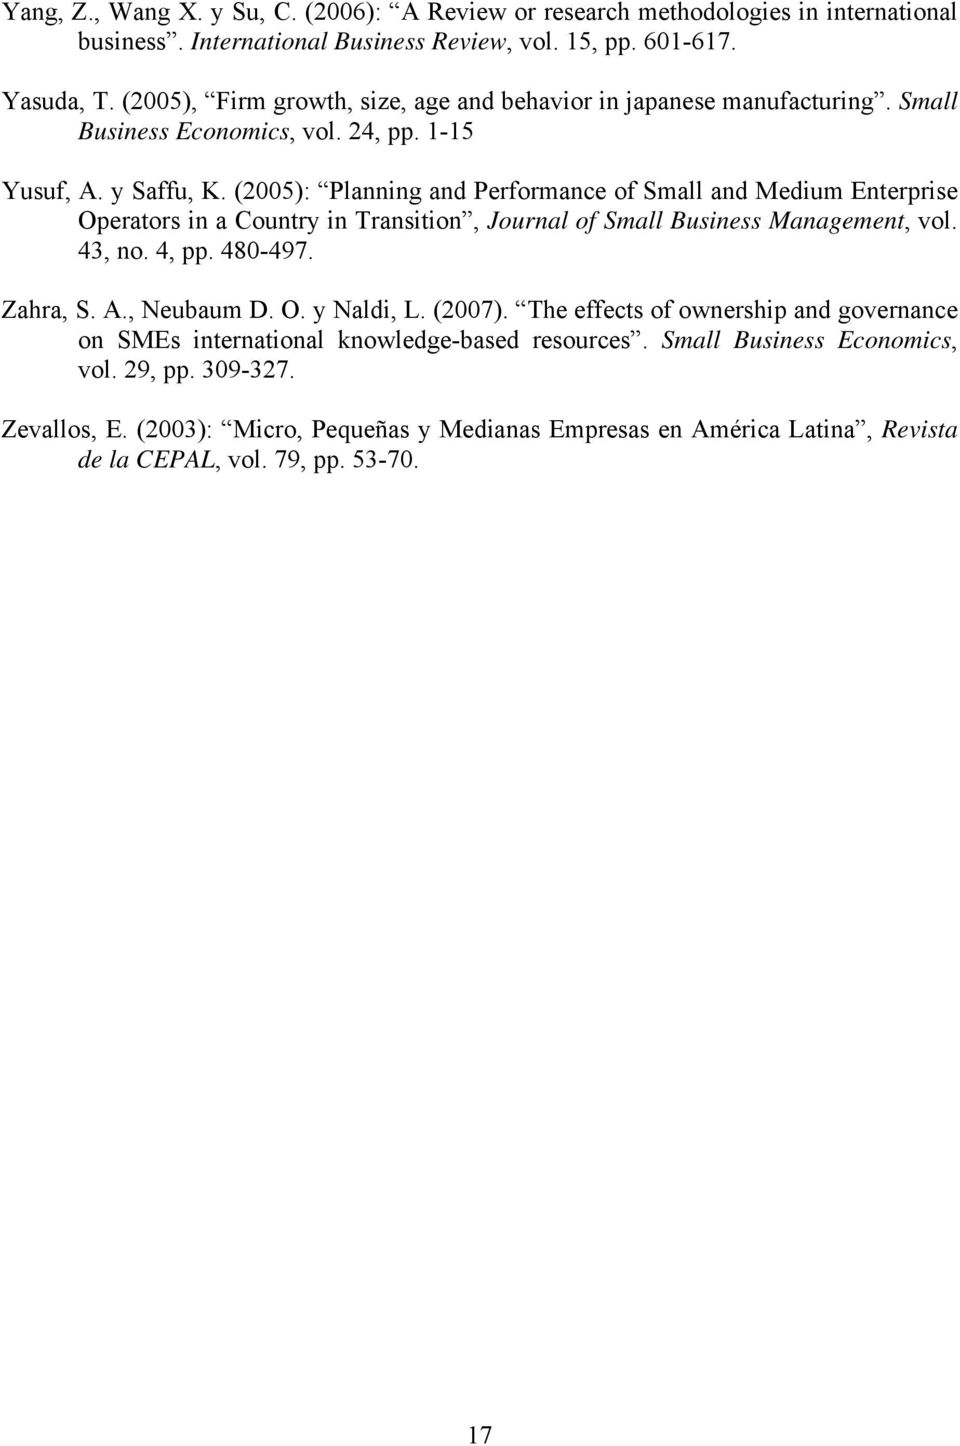 (2005): Planning and Performance of Small and Medium Enterprise Operators in a Country in Transition, Journal of Small Business Management, vol. 43, no. 4, pp. 480-497. Zahra, S. A., Neubaum D.